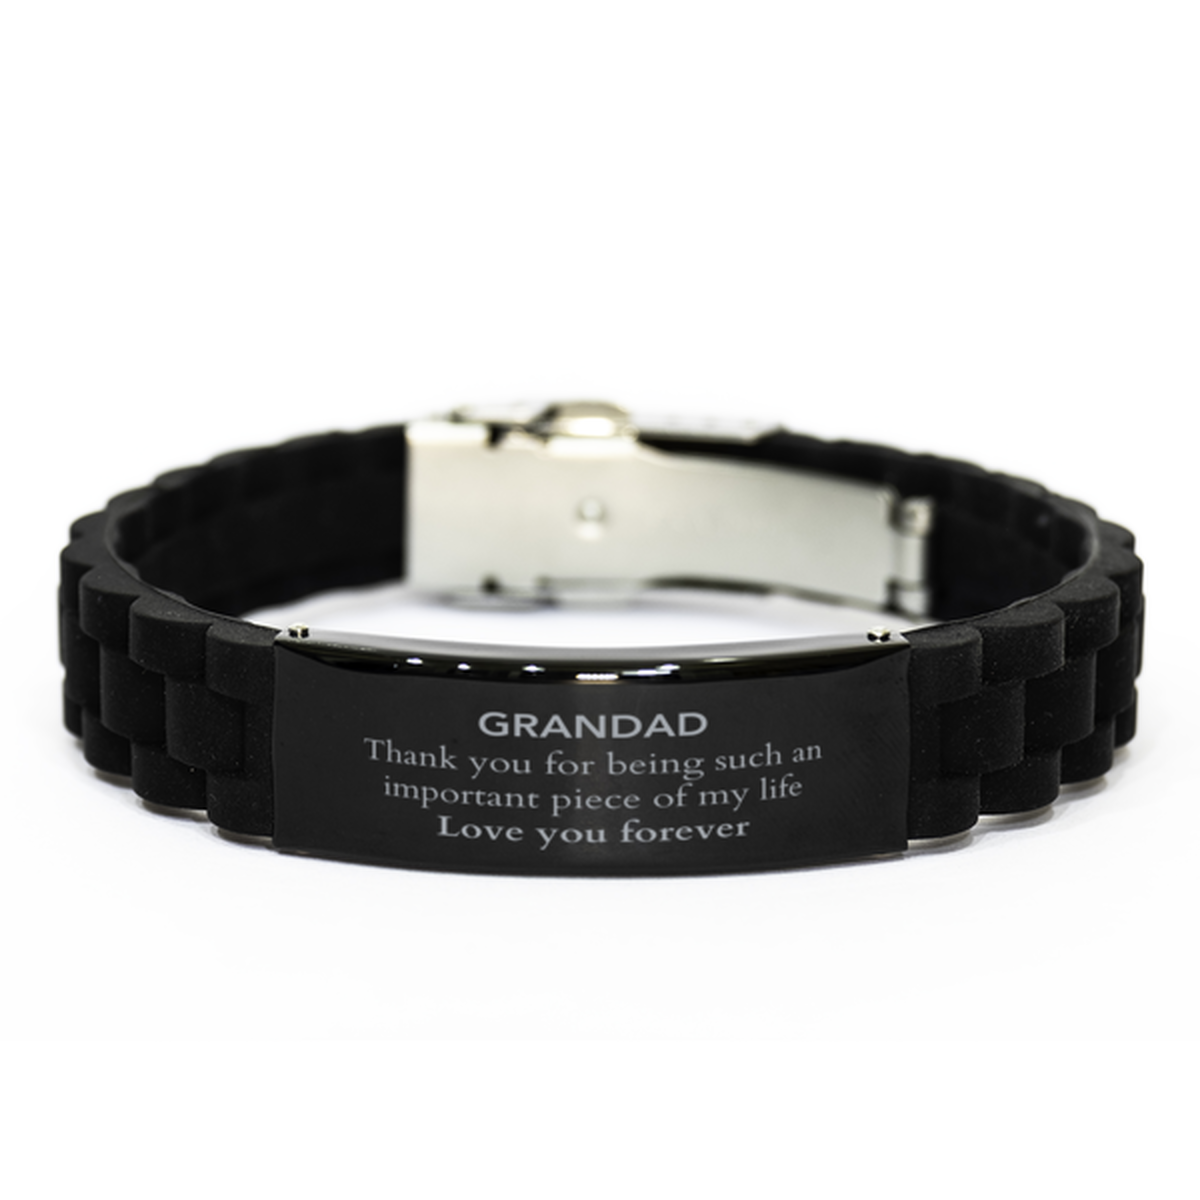 Appropriate Grandad Black Glidelock Clasp Bracelet Epic Birthday Gifts for Grandad Thank you for being such an important piece of my life Grandad Christmas Mothers Fathers Day